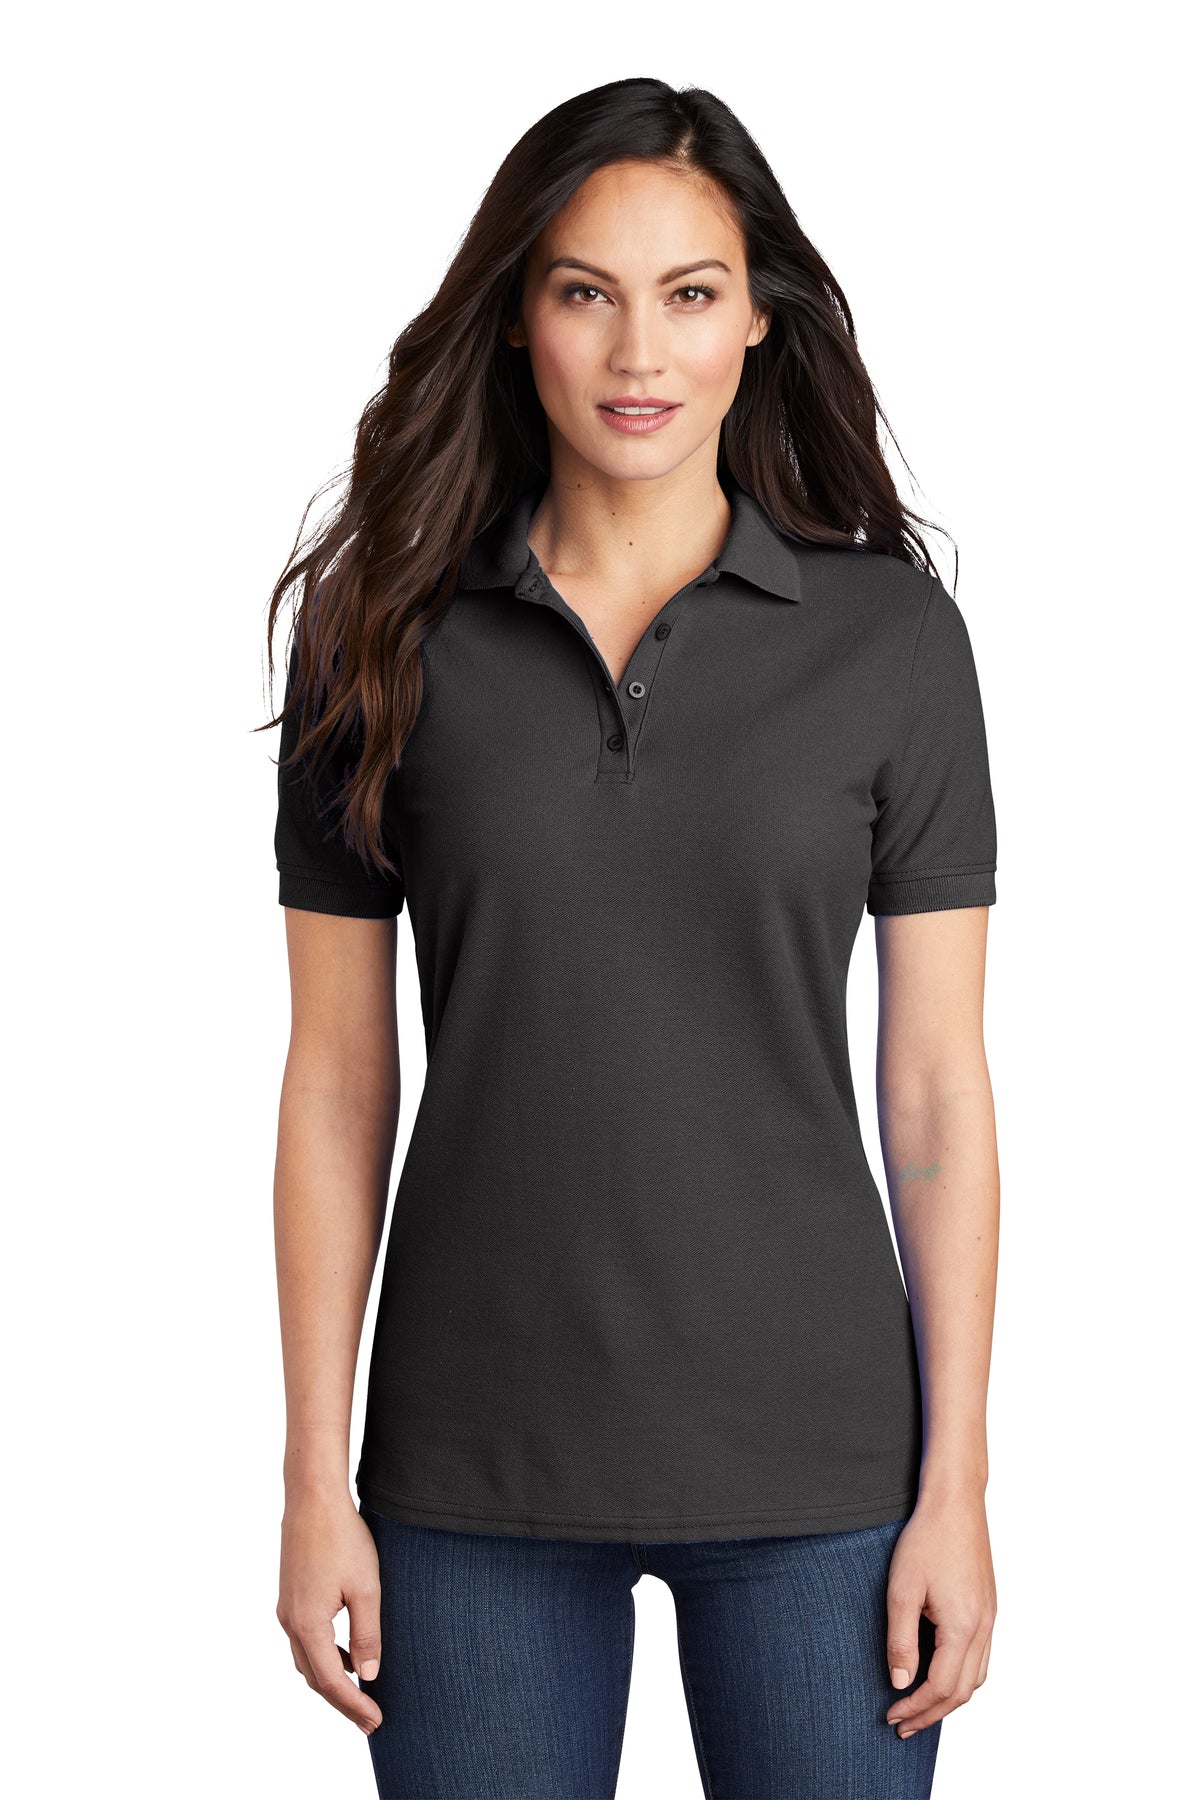 WINDSOR - Ladies Polo - Charcoal (LKP155) - Southern Grace Creations